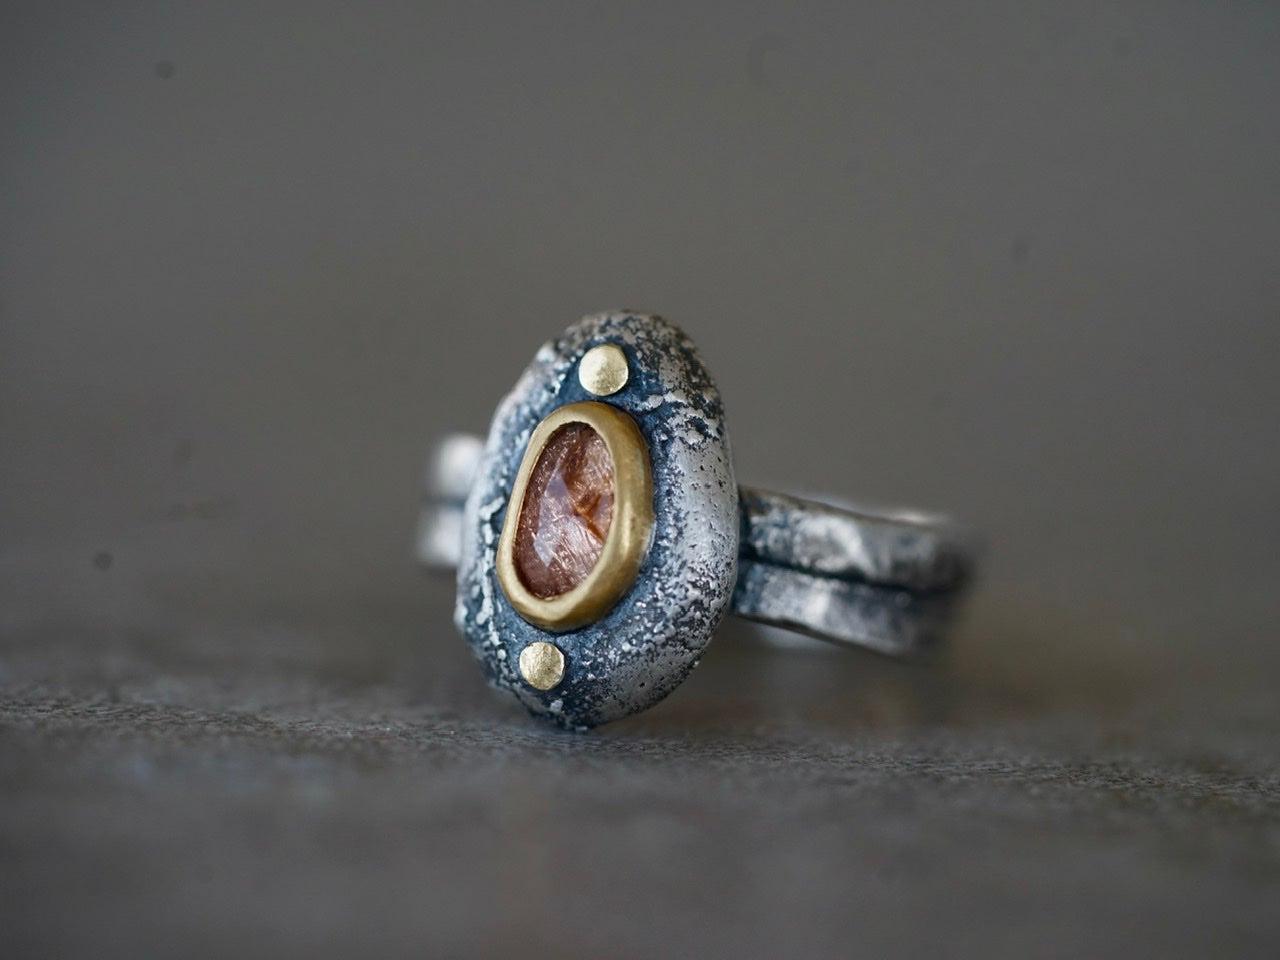 Spinel and 22 k gold pebble ring, size 6.75